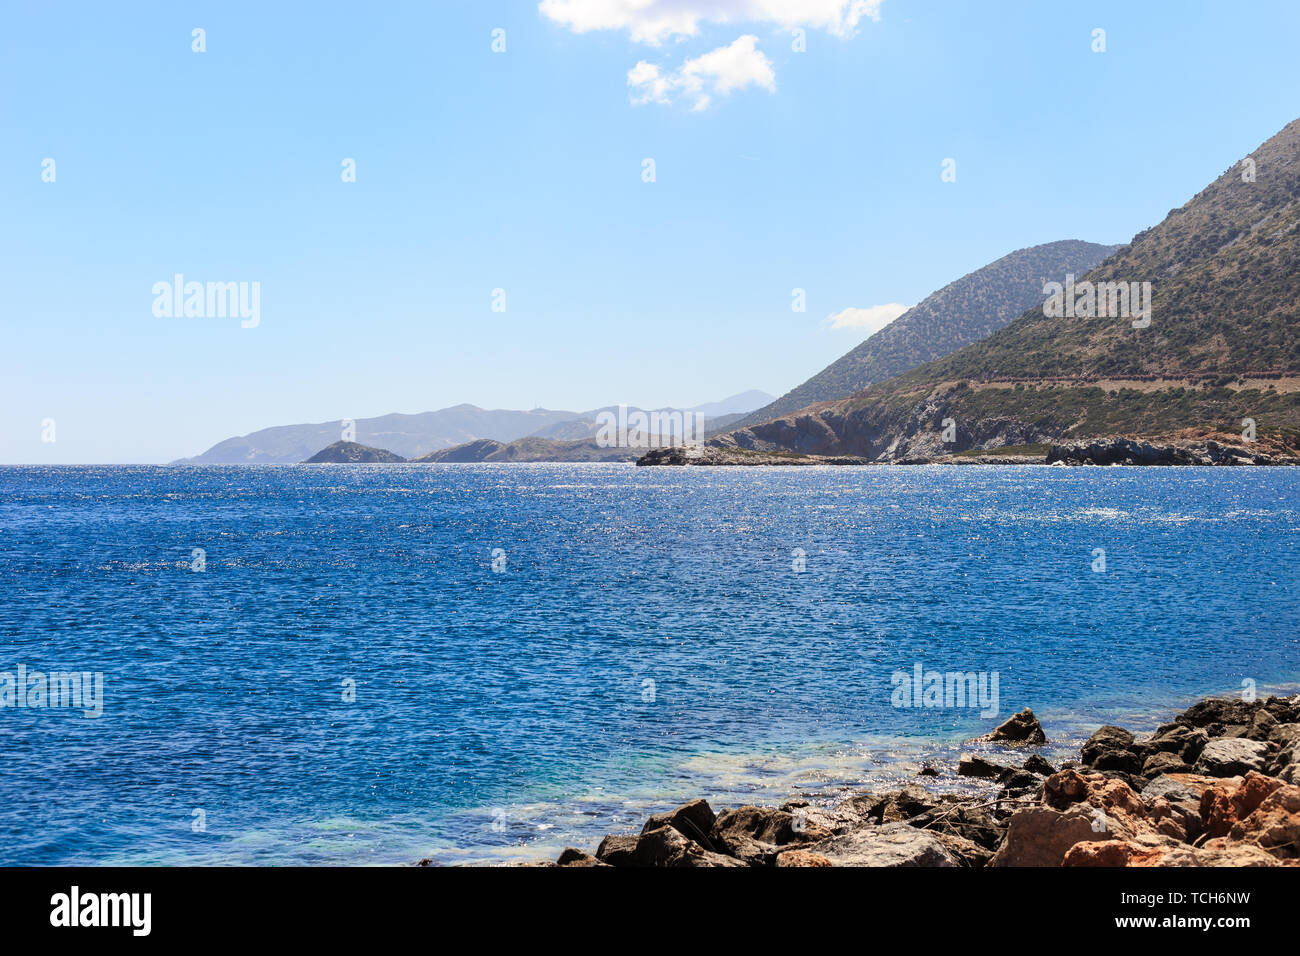 Mountains Bay in the Mediterranean Sea. Sunner vocation. Stock Photo